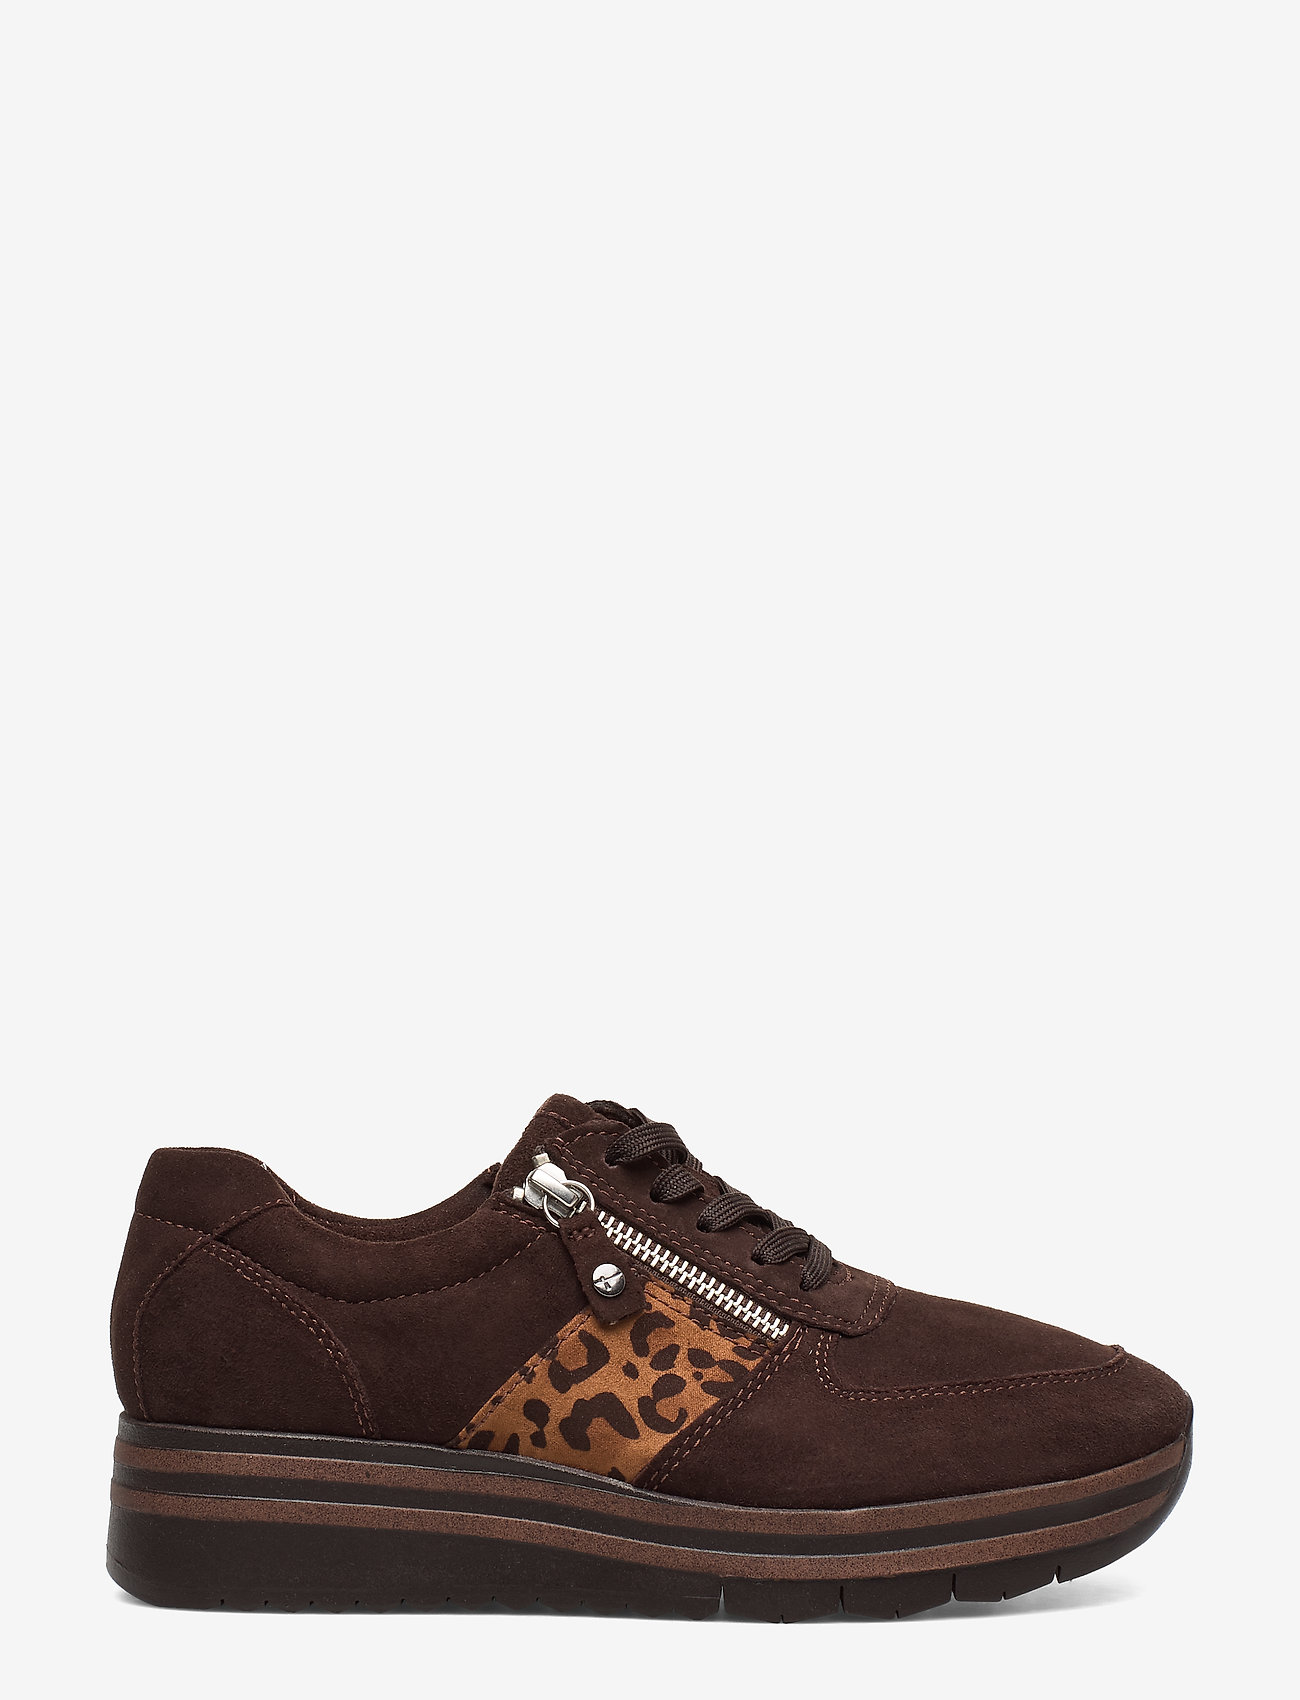 Tamaris - Woms Lace-up - niedrige sneakers - mocca/leo - 1